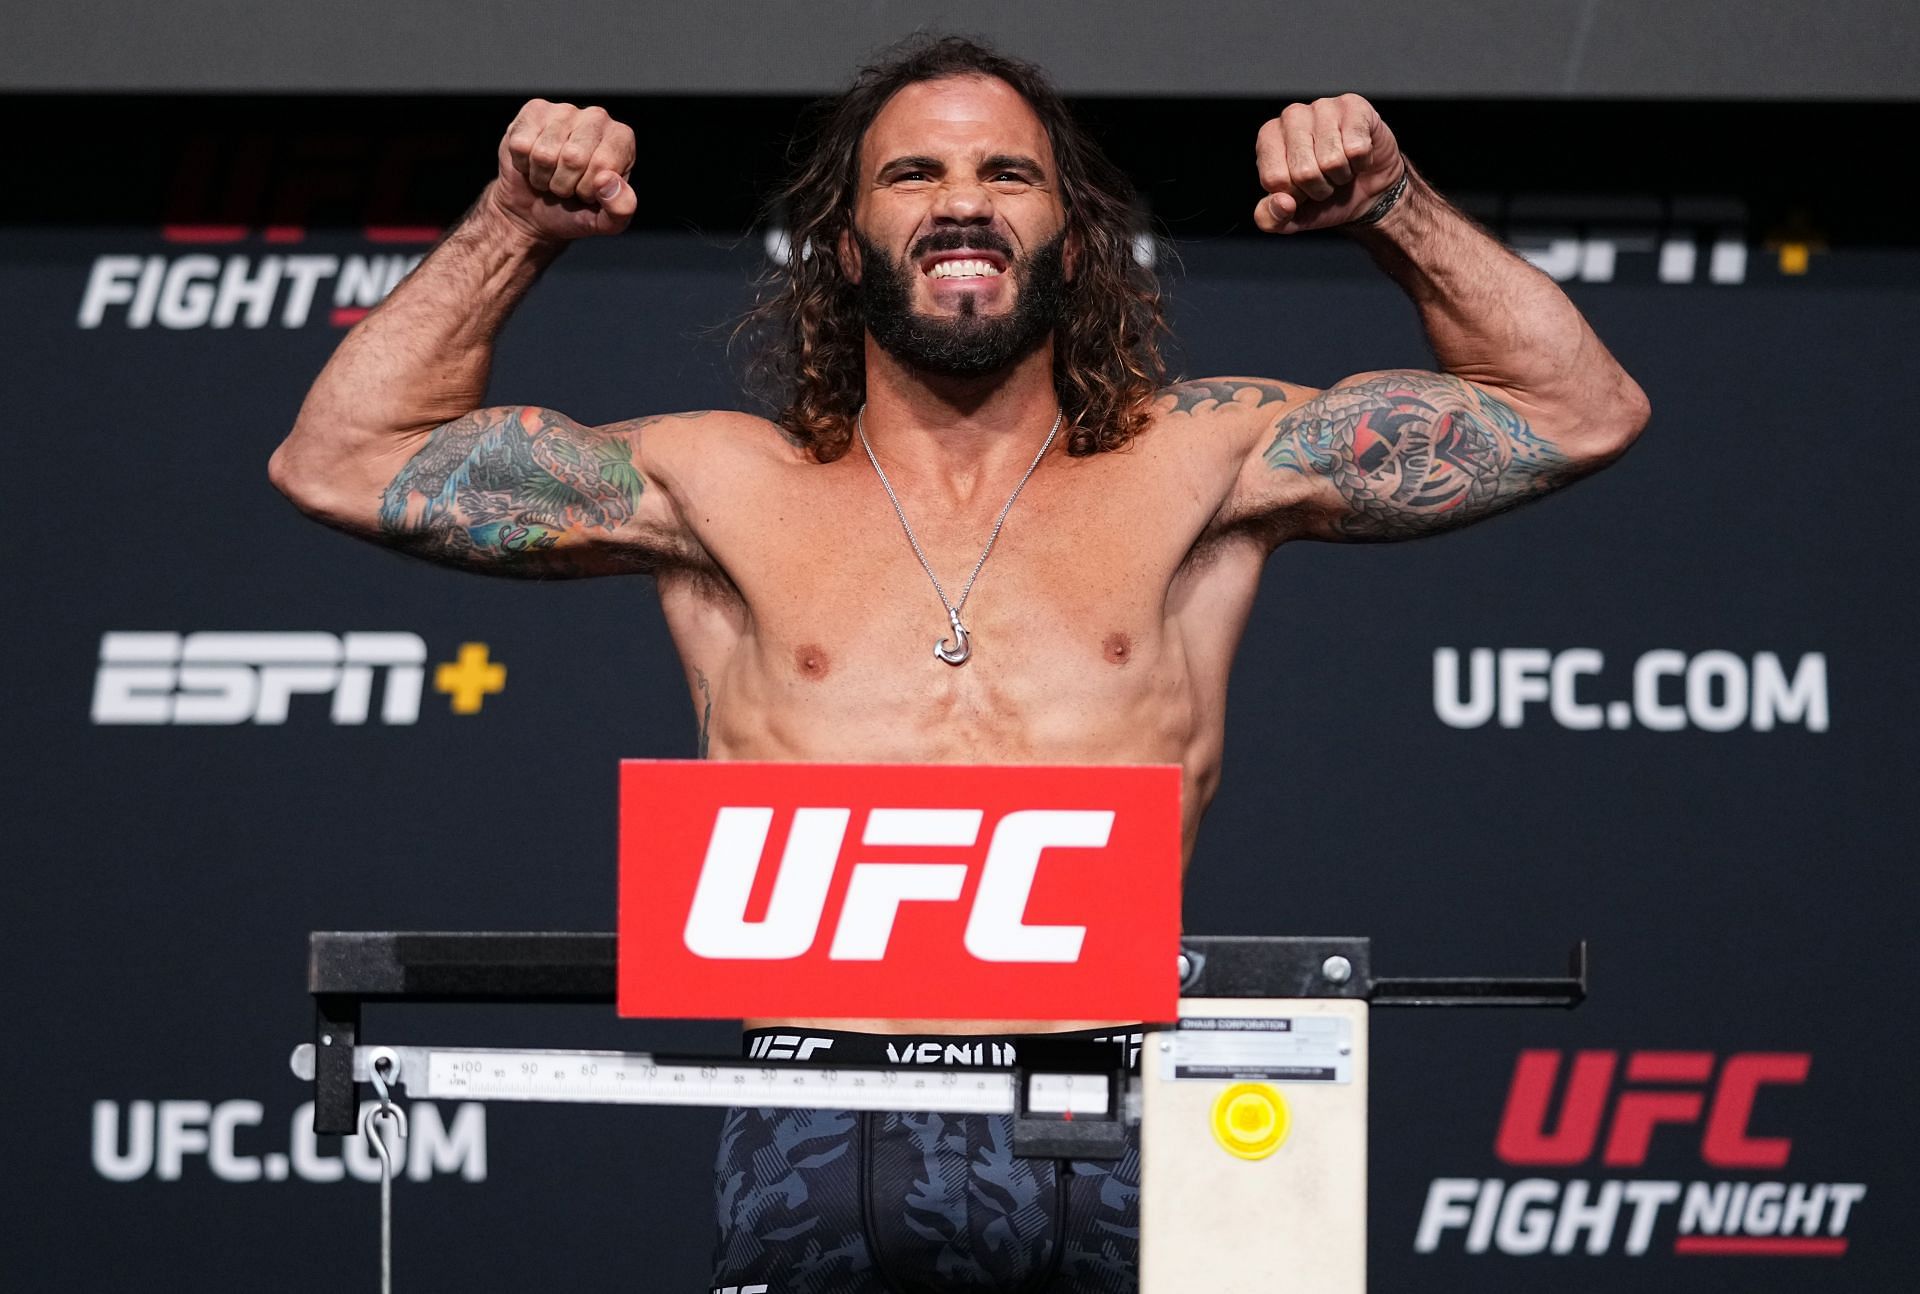 Clay Guida has sported his caveman locks since his UFC debut in 2006